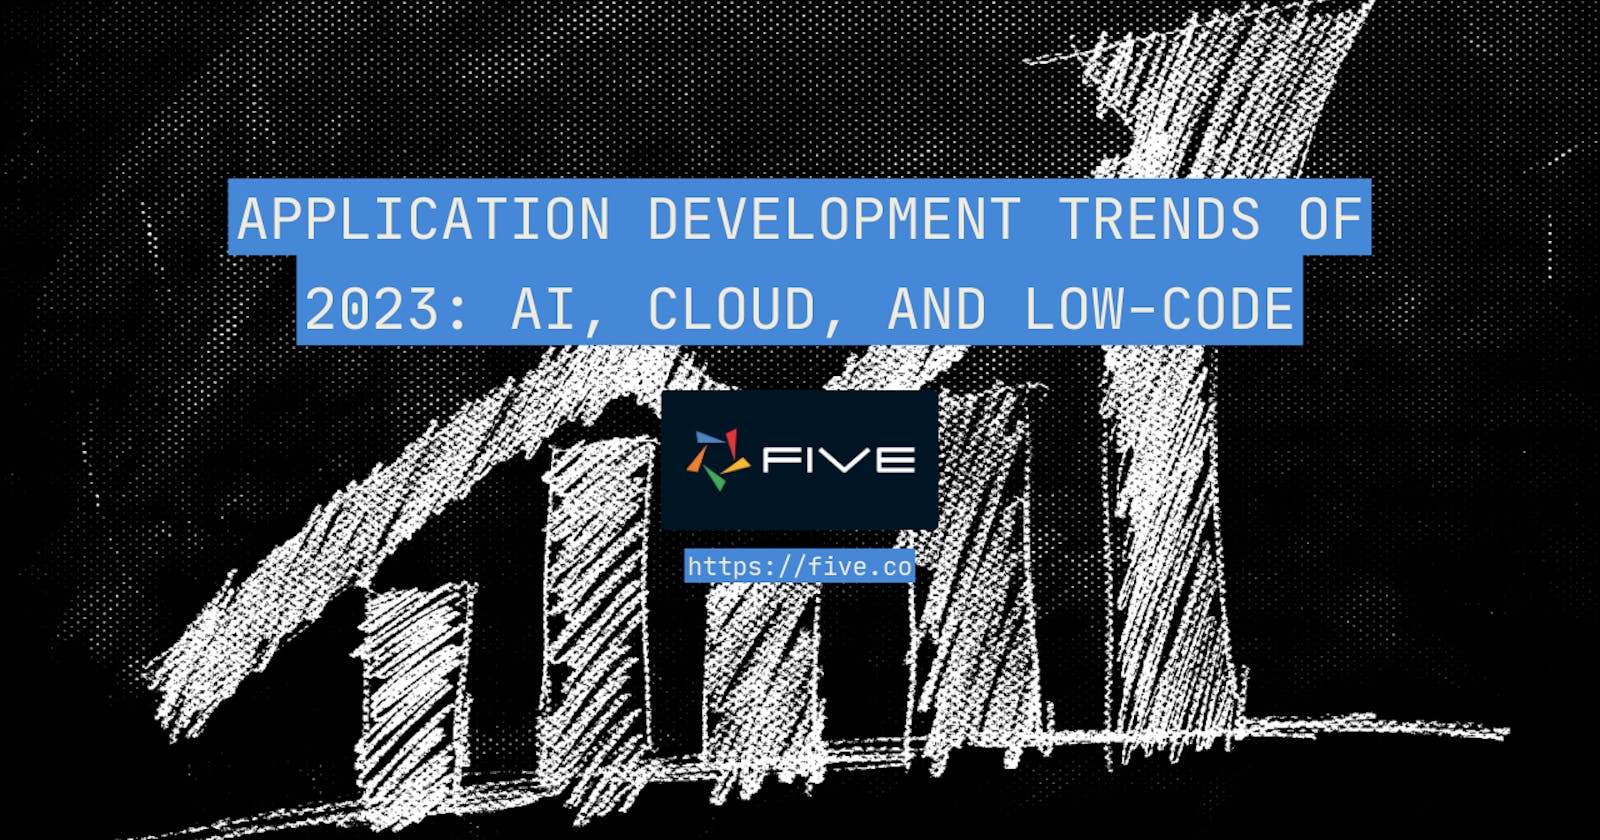 Most Important Application Development Trends: AI, Cloud, and Low-Code